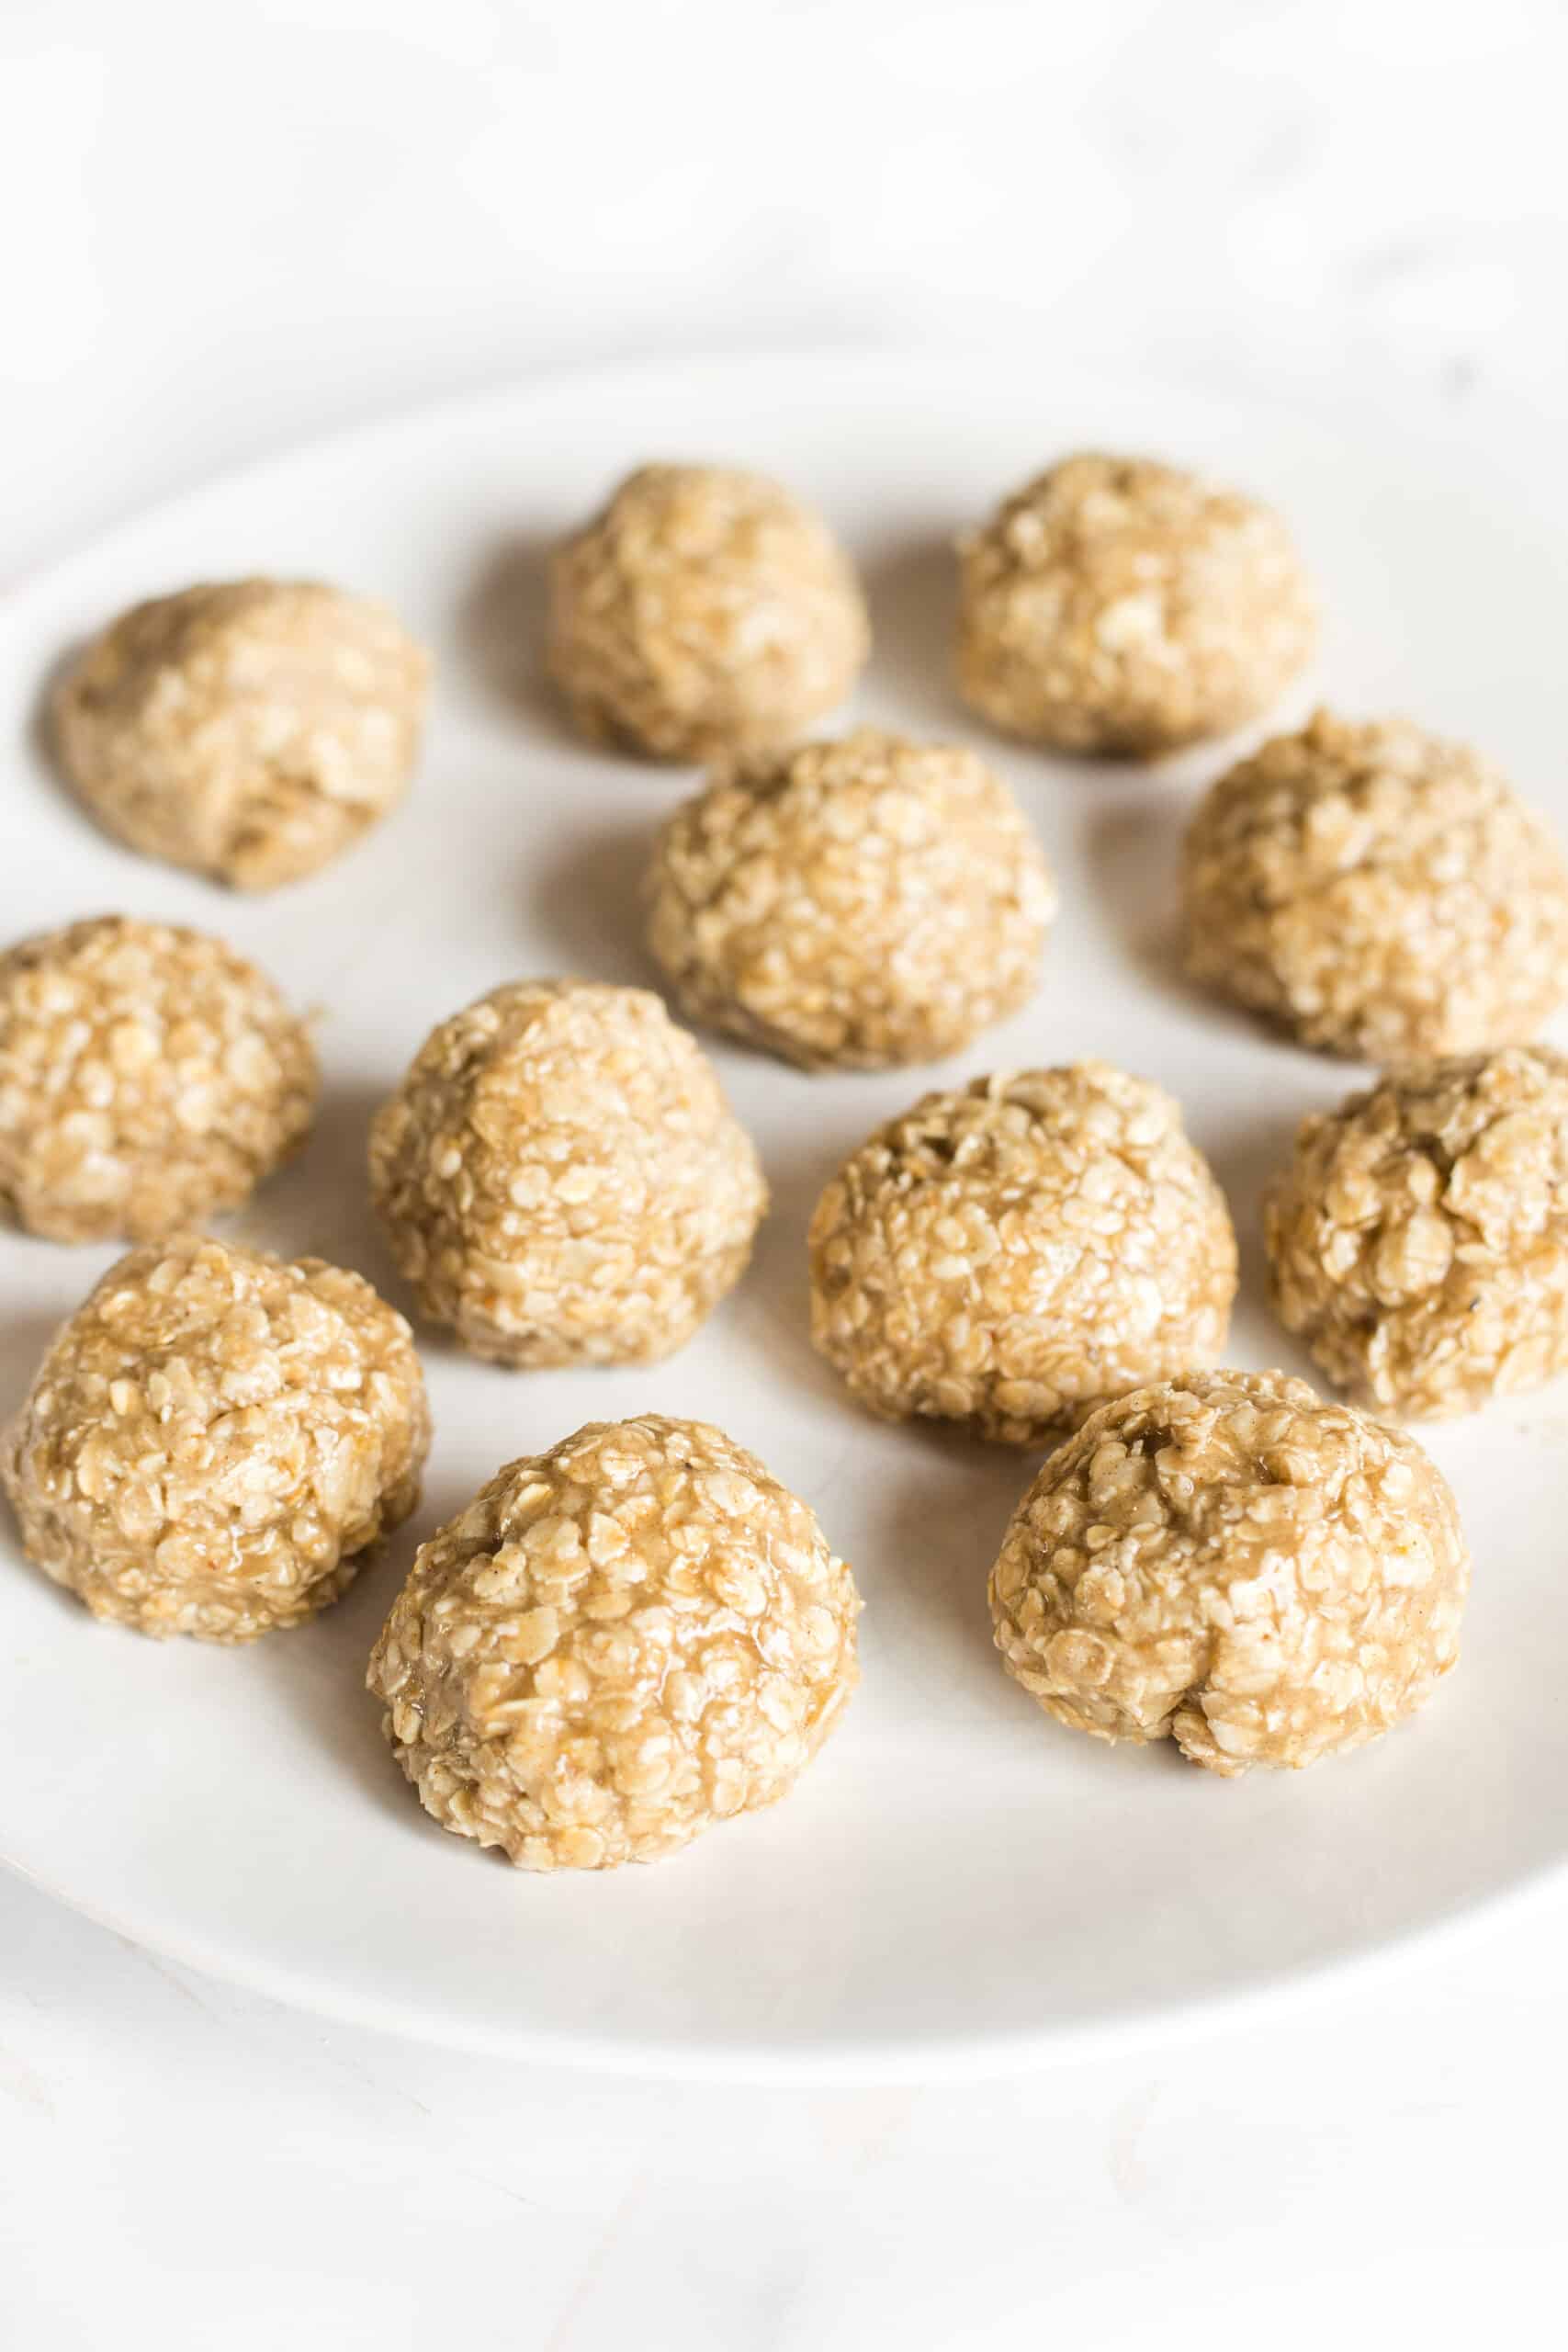 Balls of oatmeal cookie dough on a white plate.